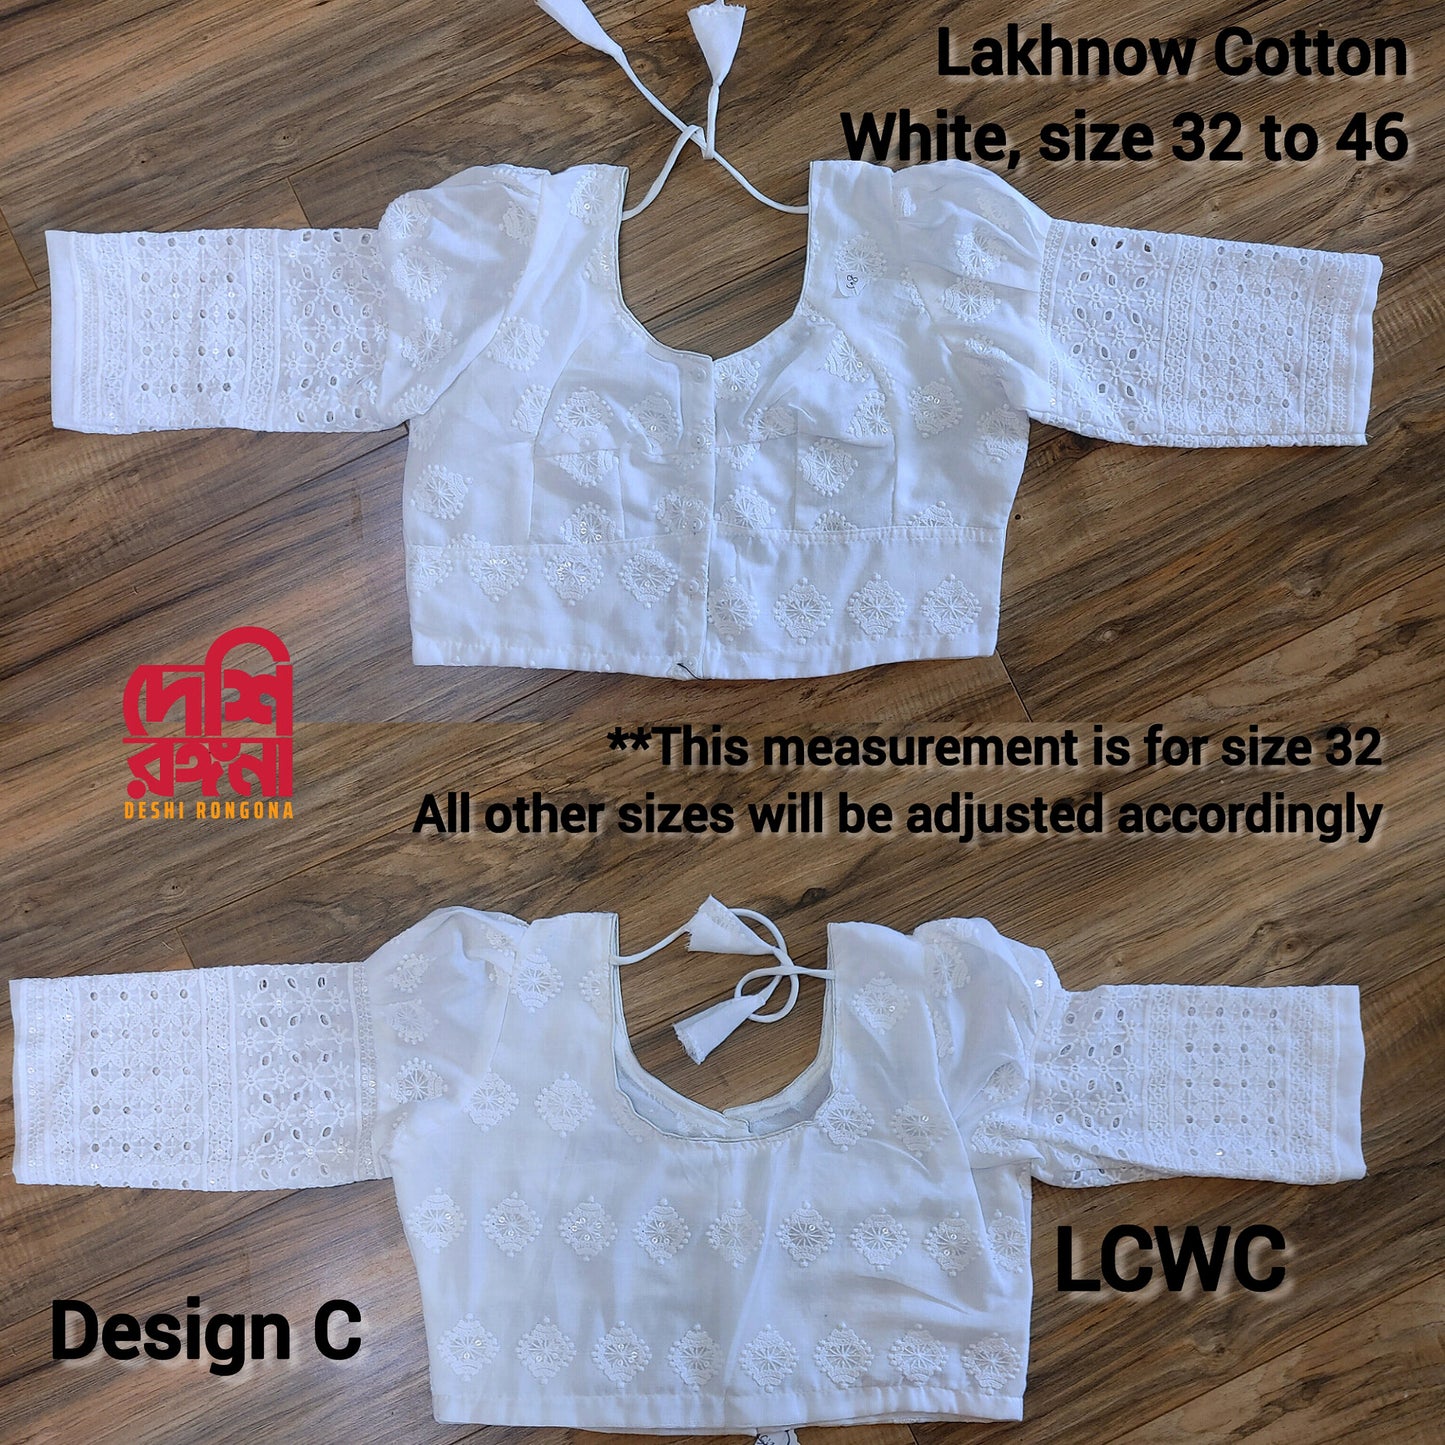 White Lakhnow Cotton Blouse, Size 34 to 48, Comfortable, goes with any saree collection you have in your closet